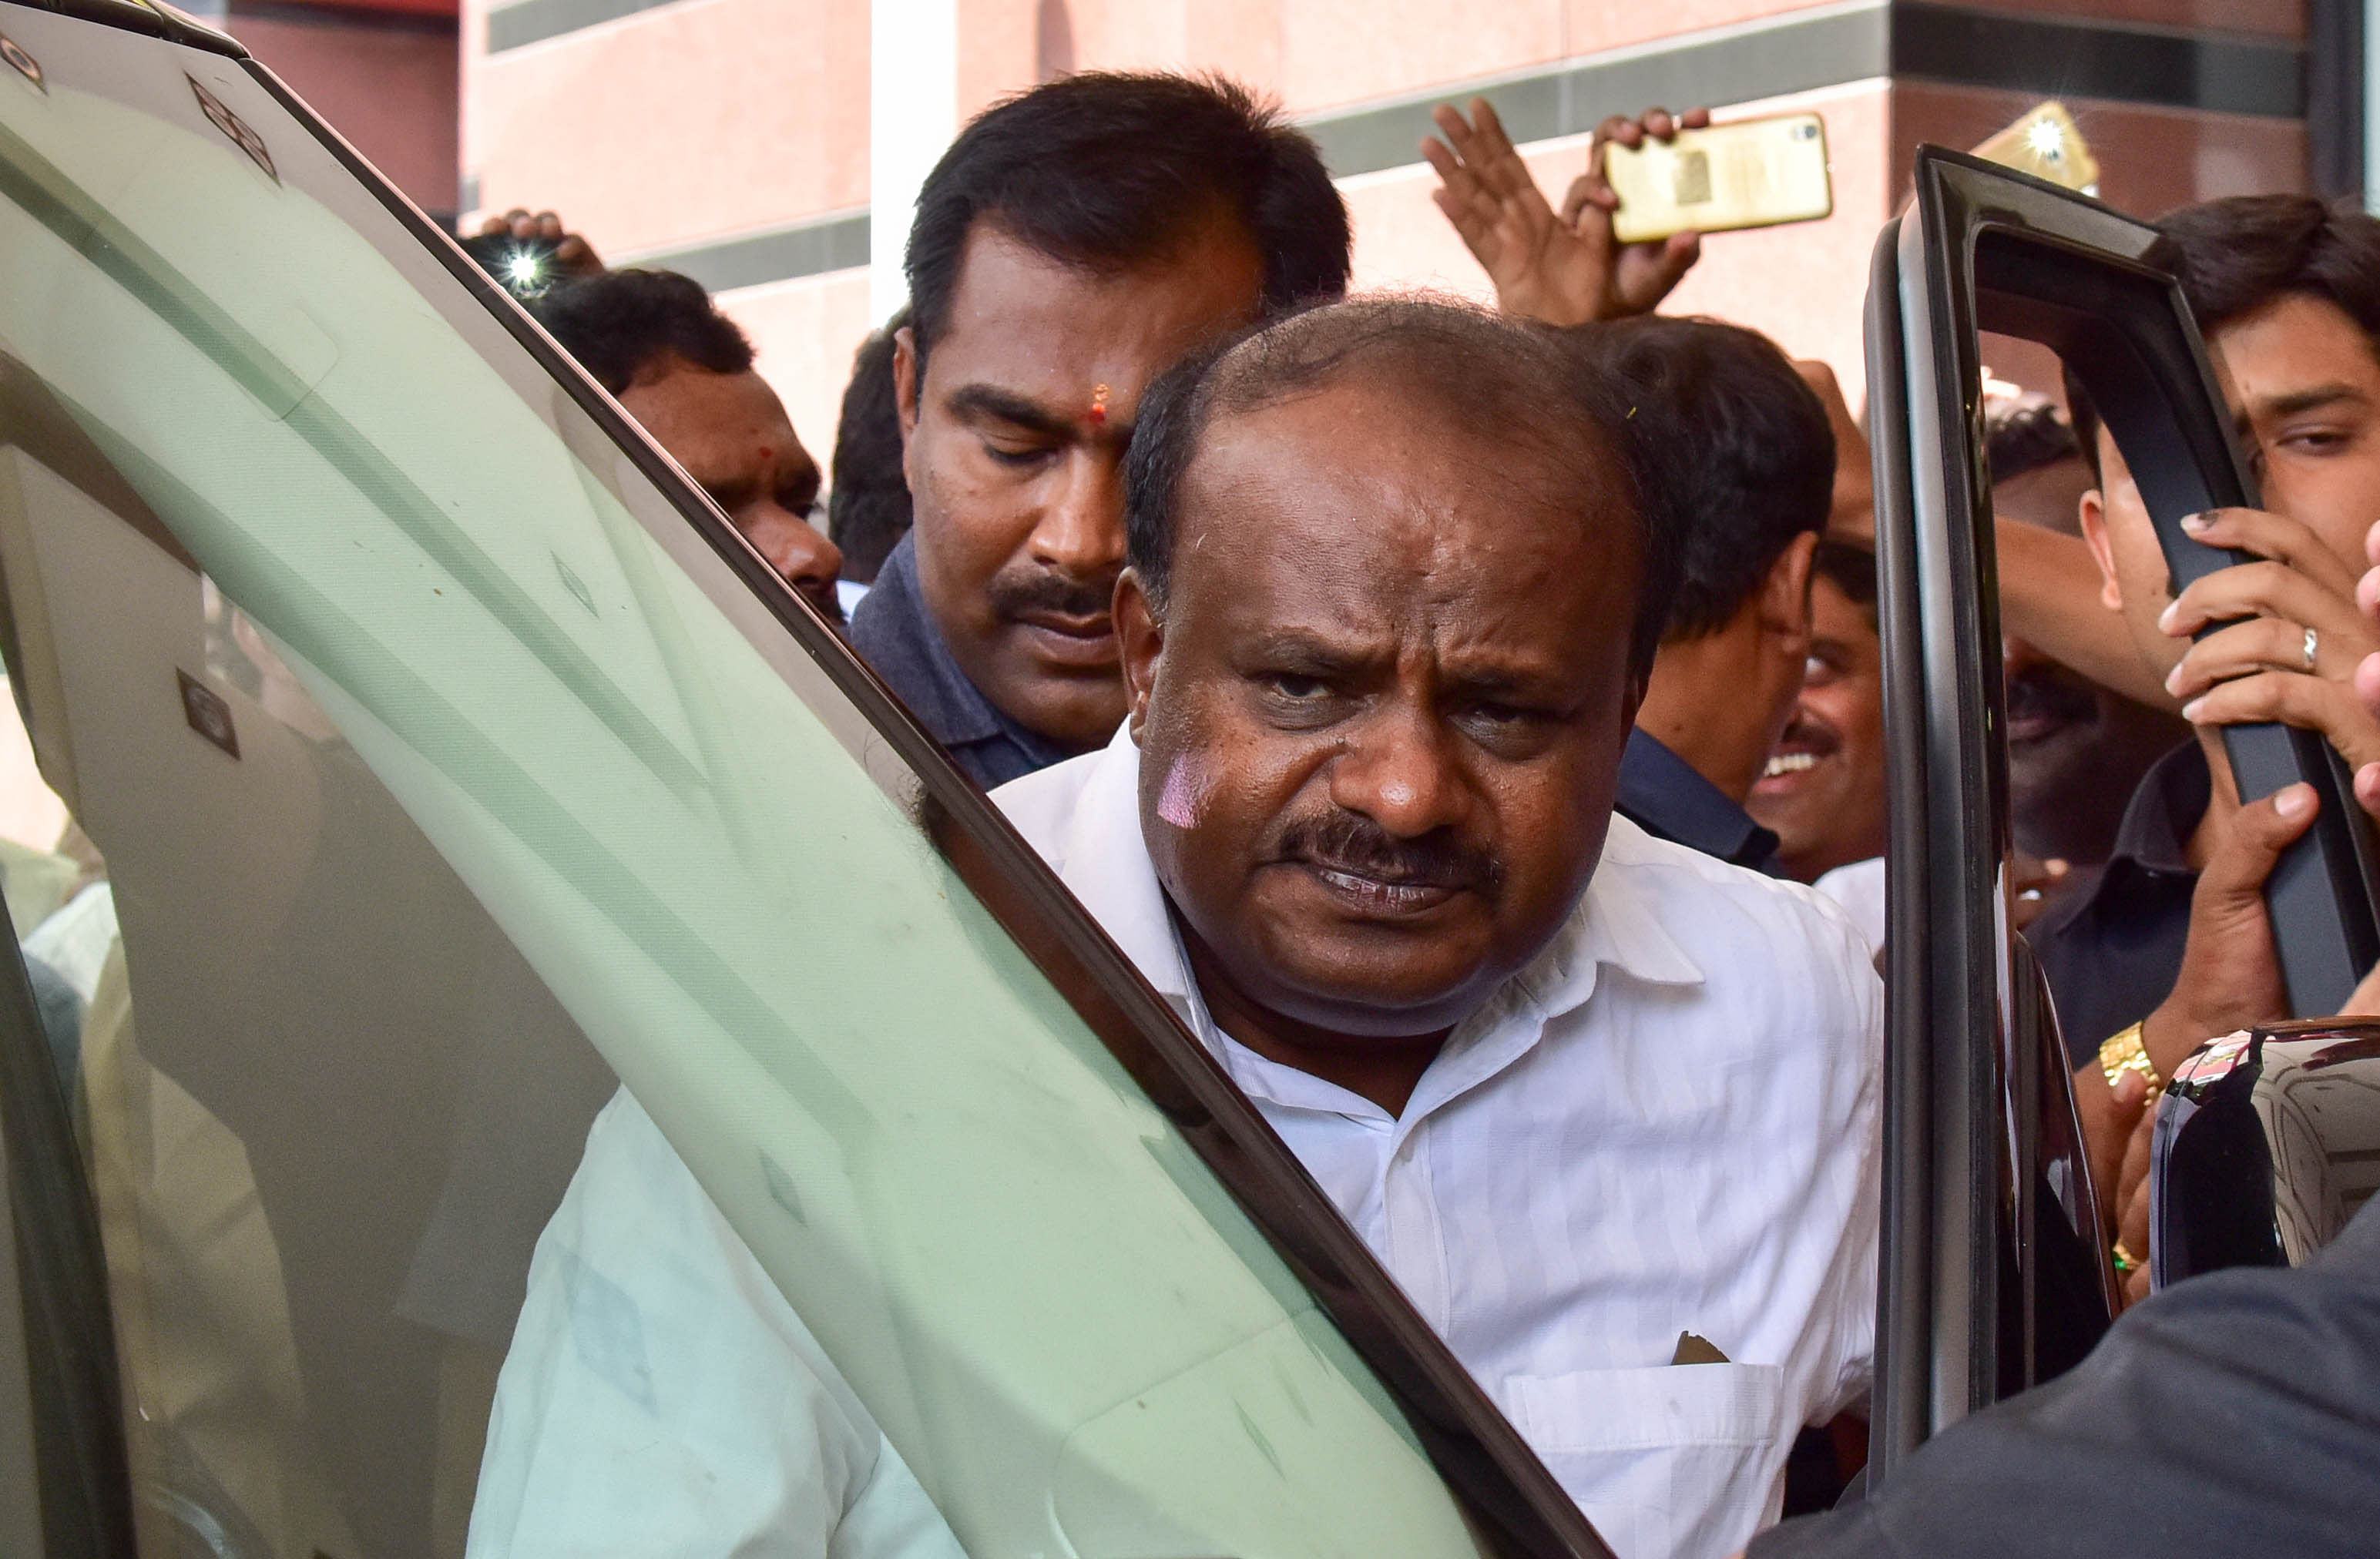 H D Kumaraswamy leaves the Le Meridien hotel, Bengaluru, after attending the JD(S) legislature party meeting on Sunday. DH Photo